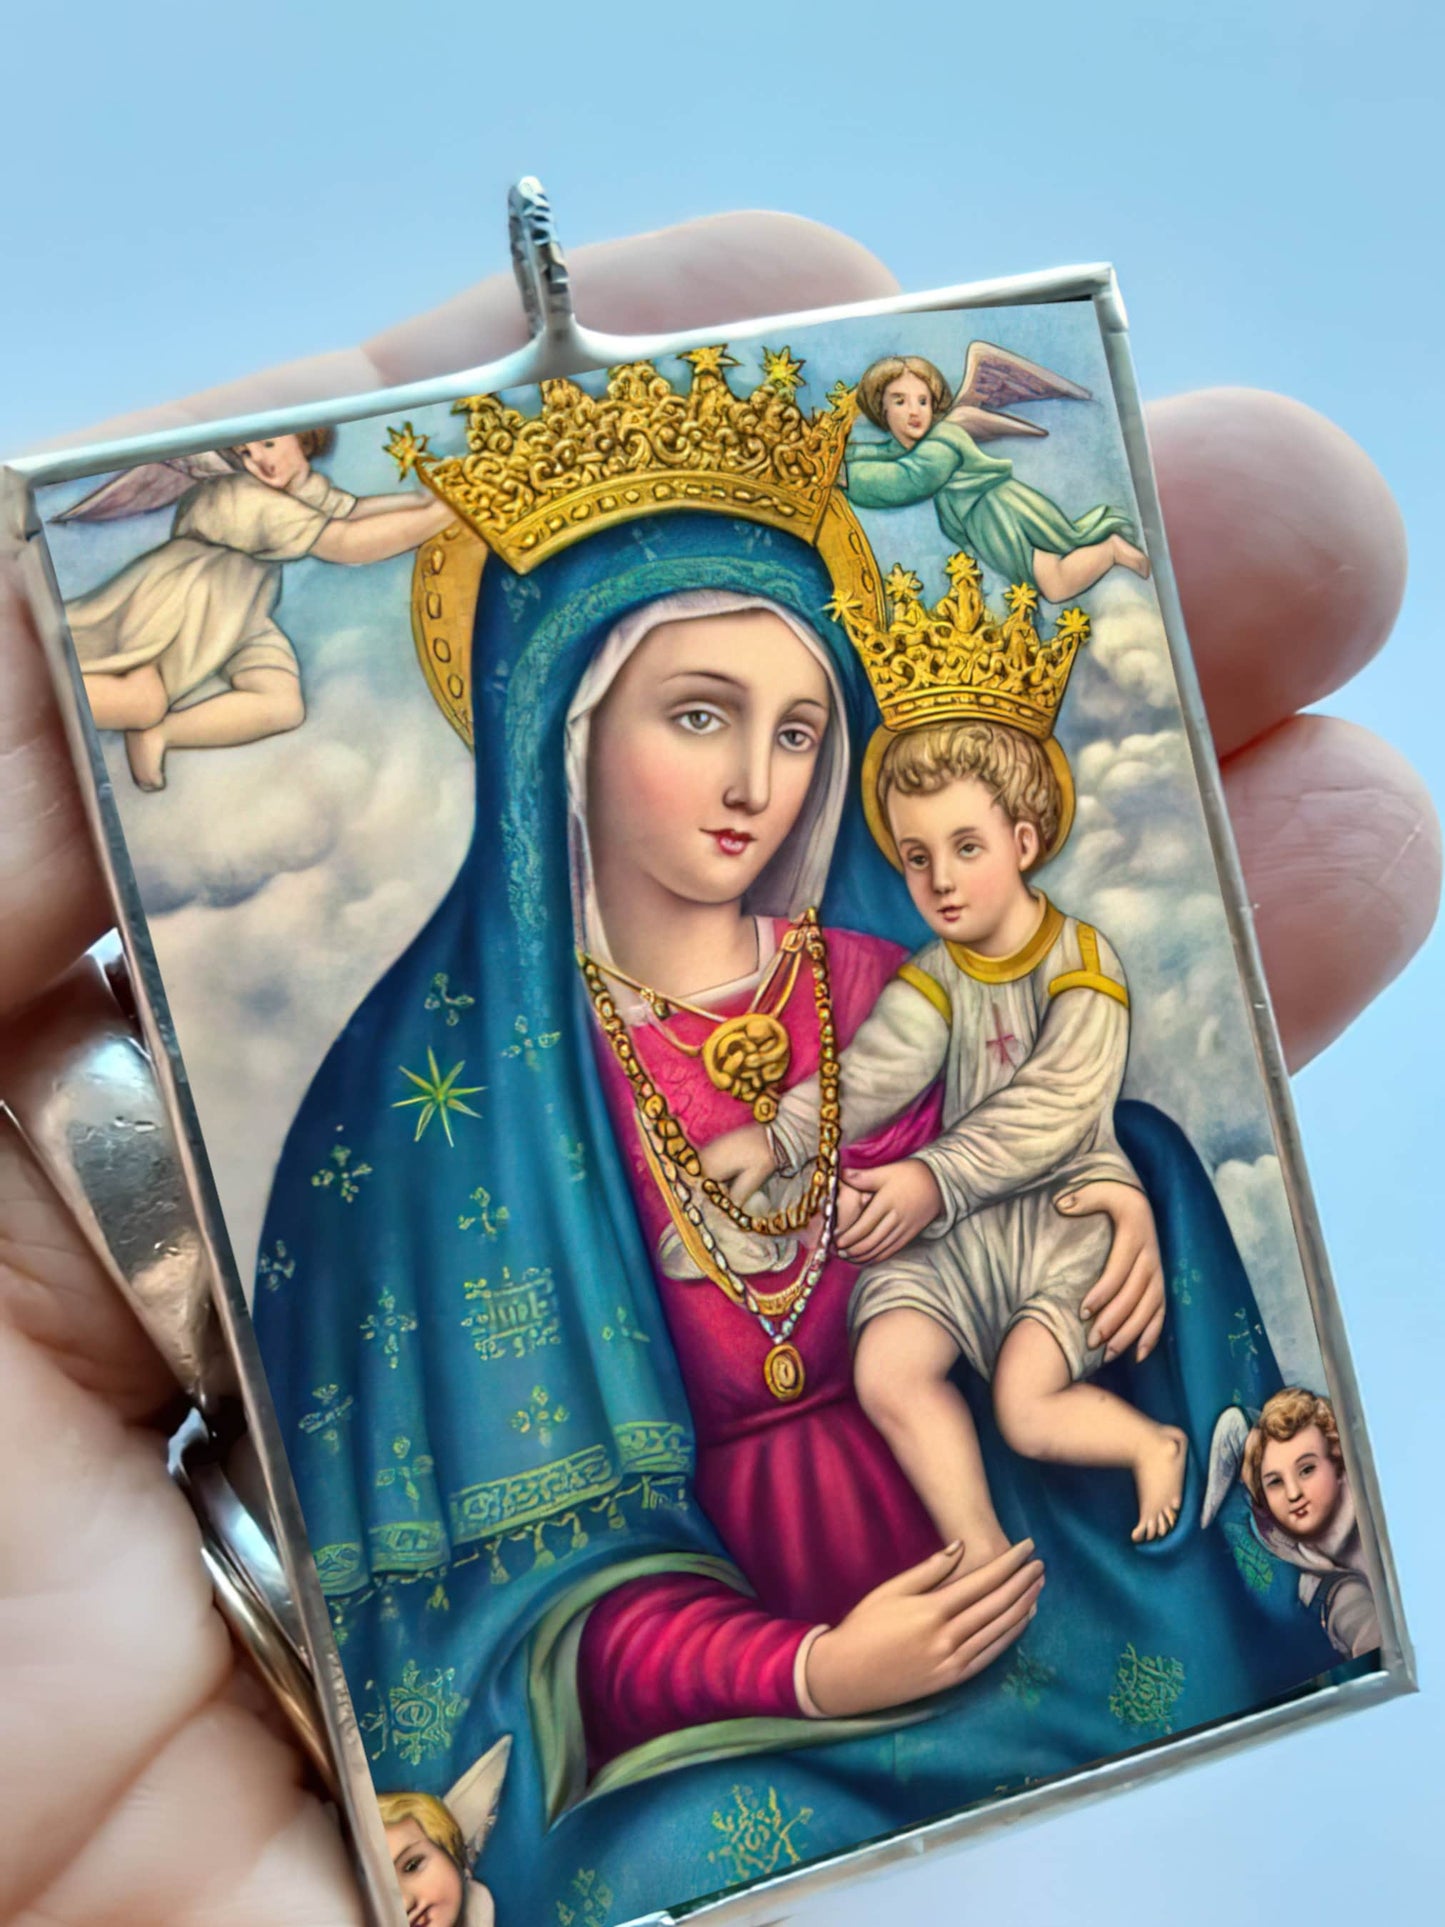 New! Christmas Ornament Padre Pio's Favorite Madonna and Child